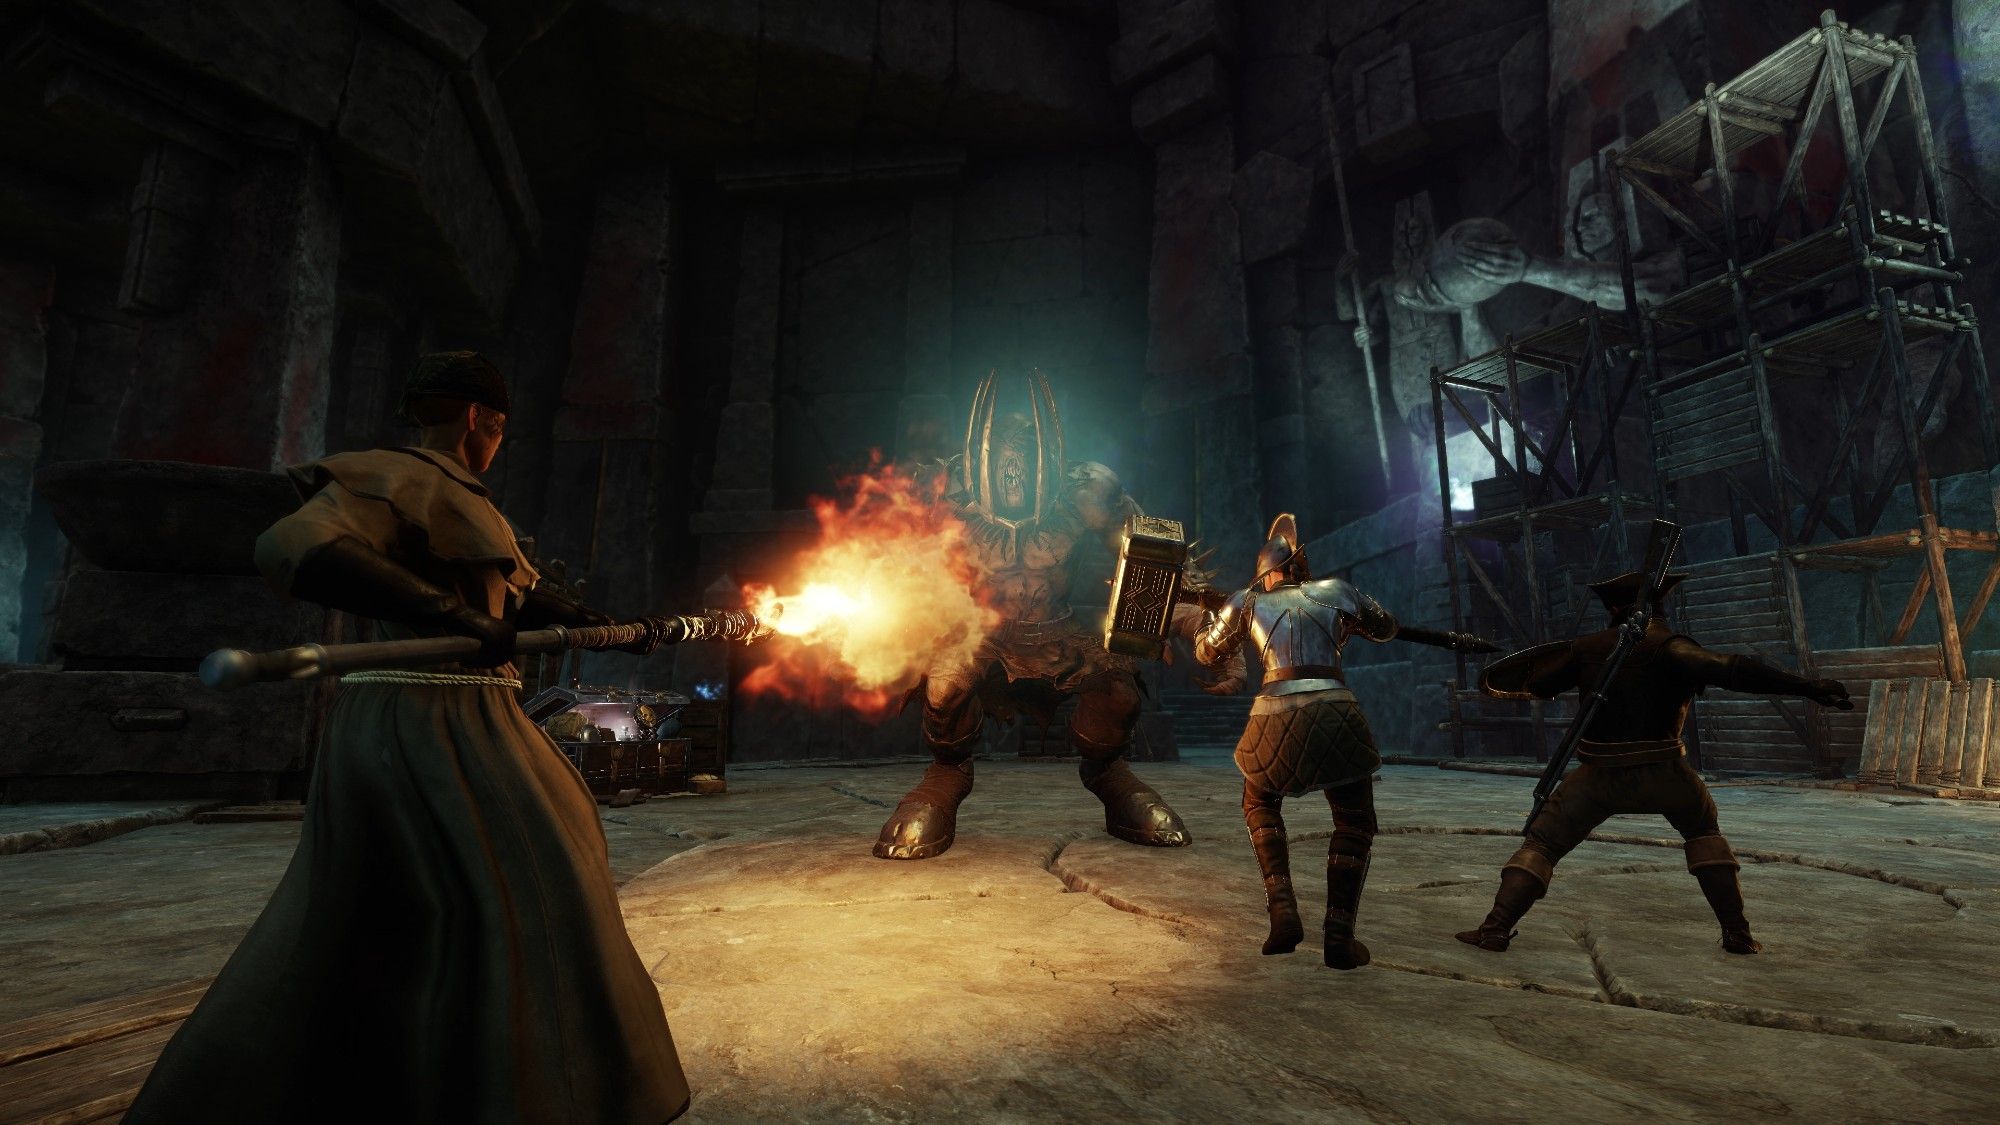 Players fight a demonic creature during the Amrine Expedition in New World